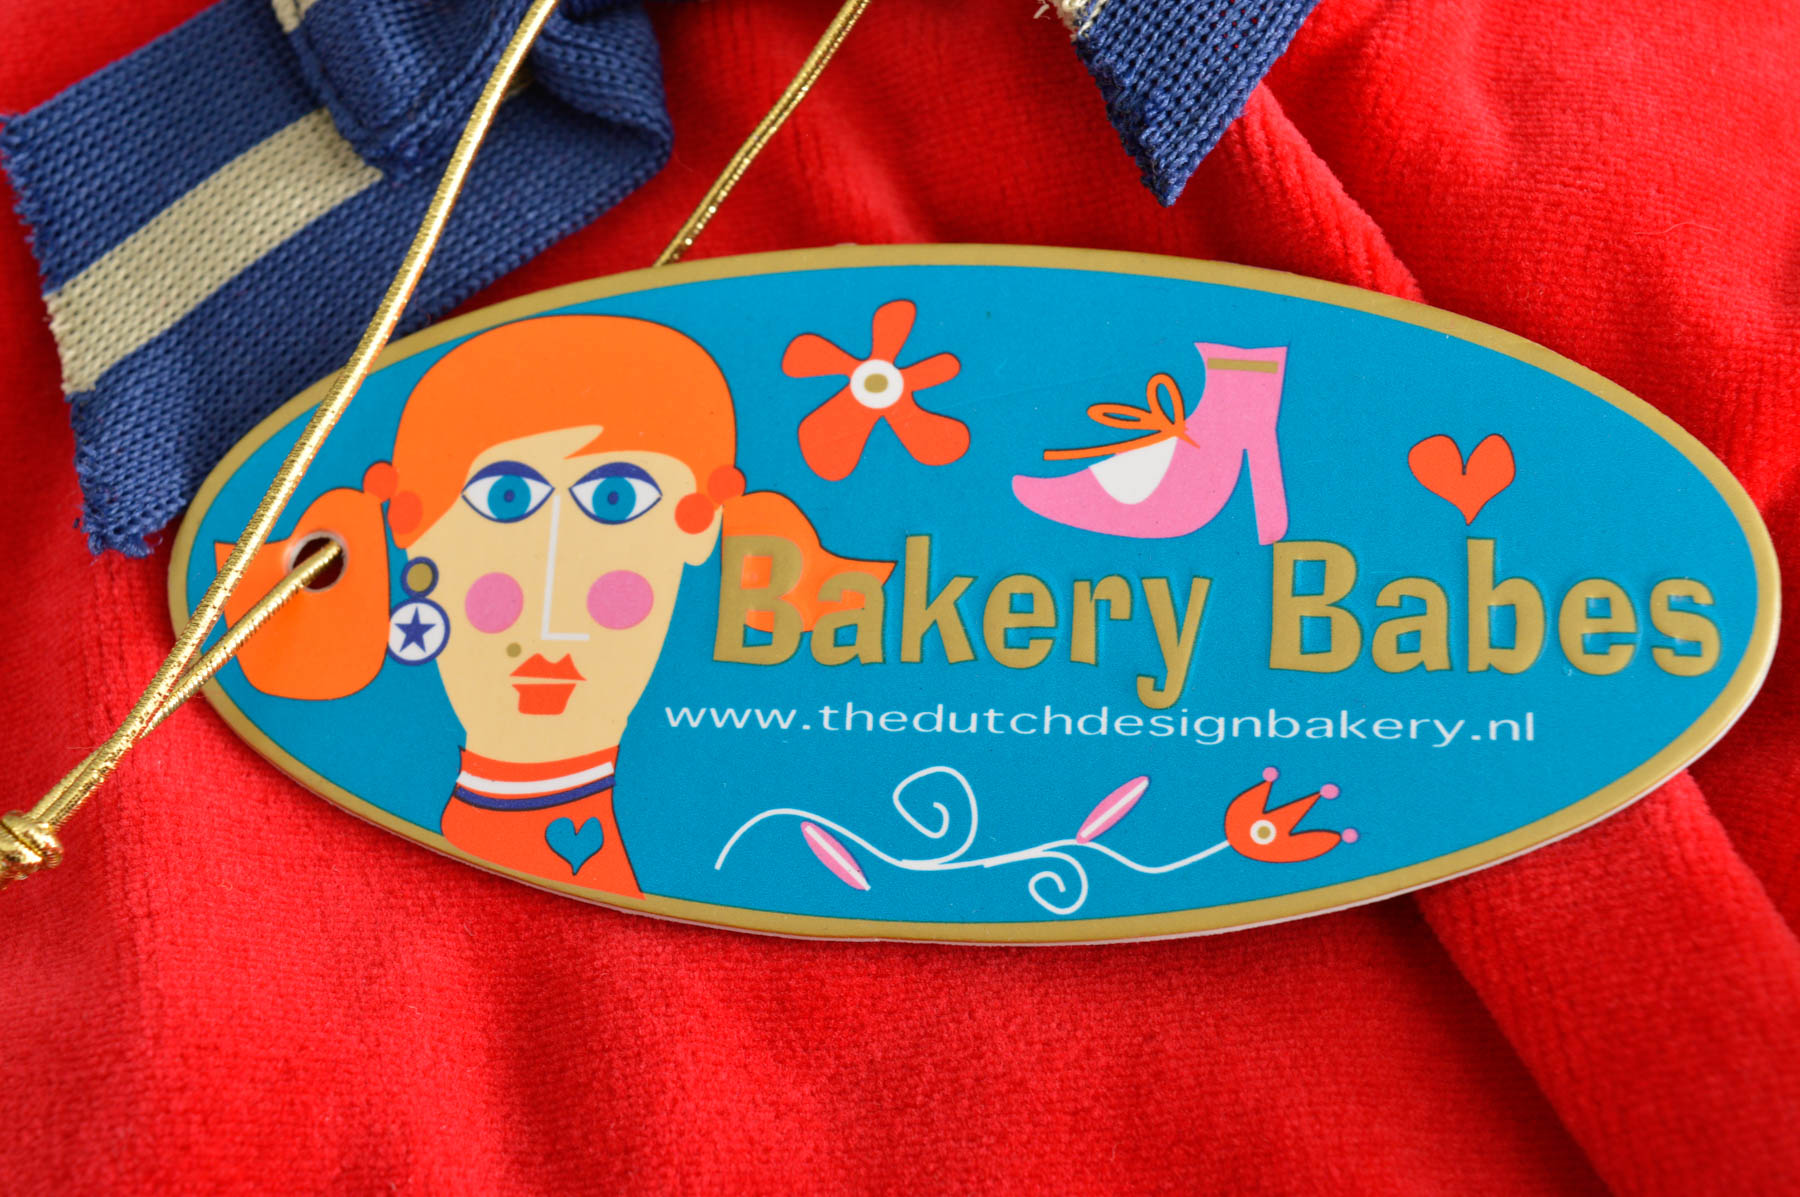 Child's dress - Bakery Babes by The Dutch Design Bakery - 2